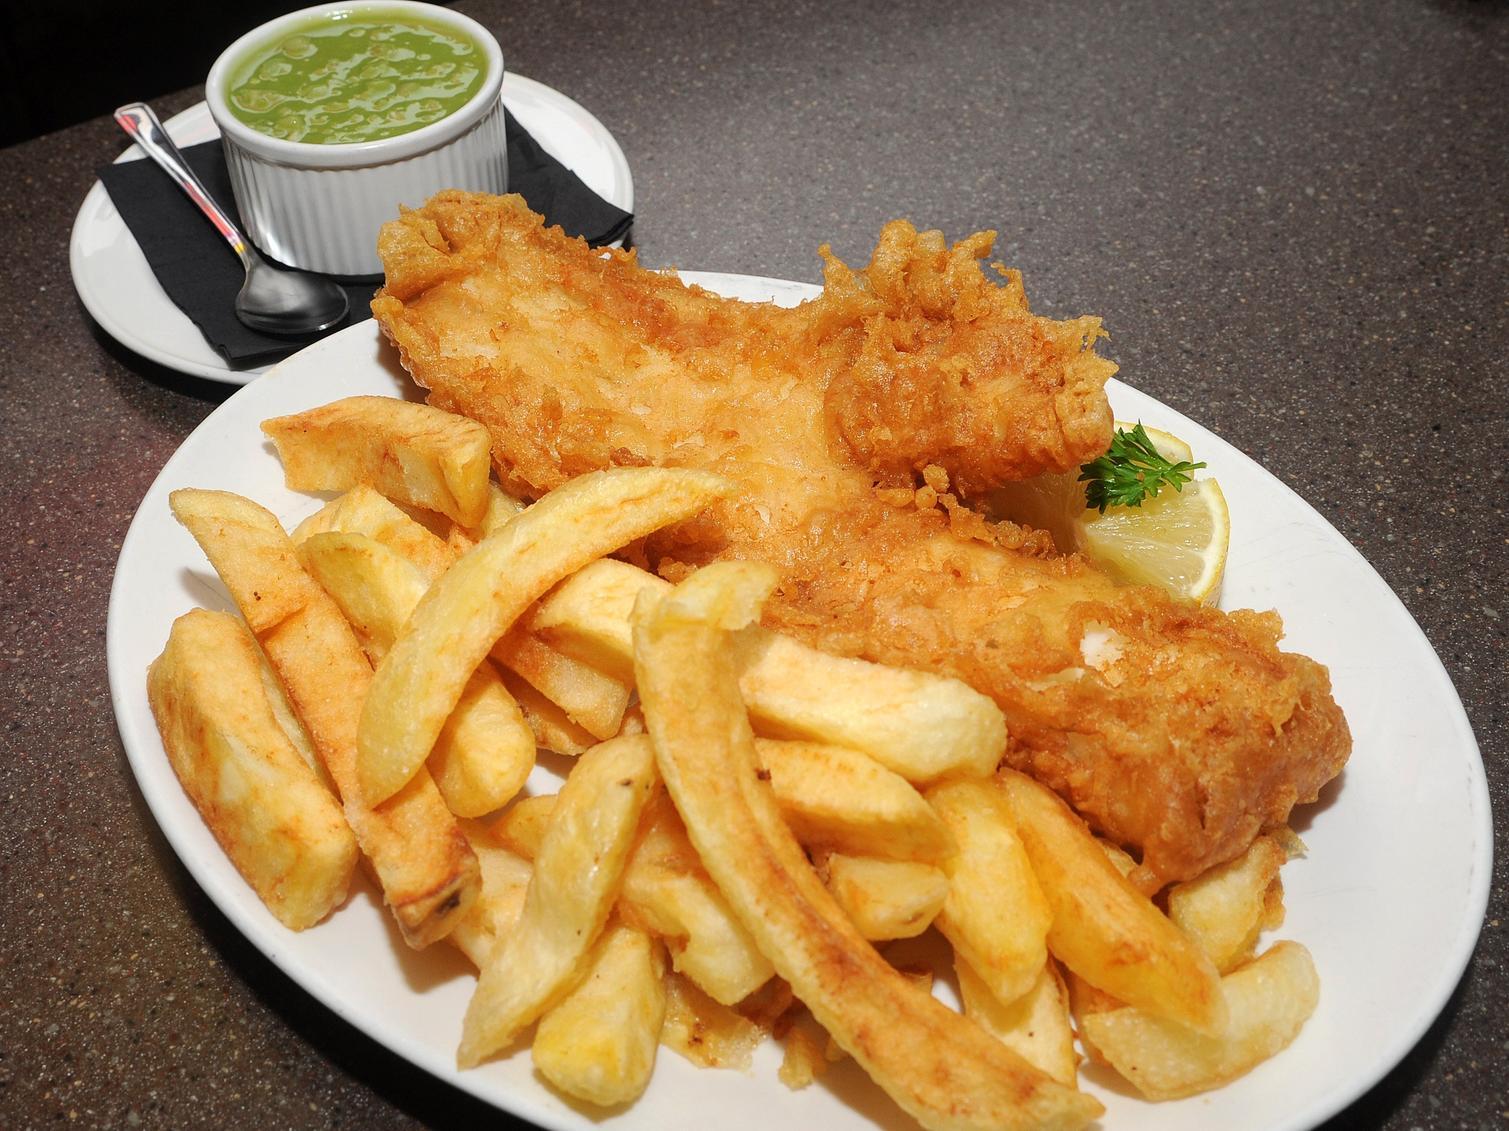 These are the 15 best places to get Fish and Chips in Leeds, according to TripAdvisor.